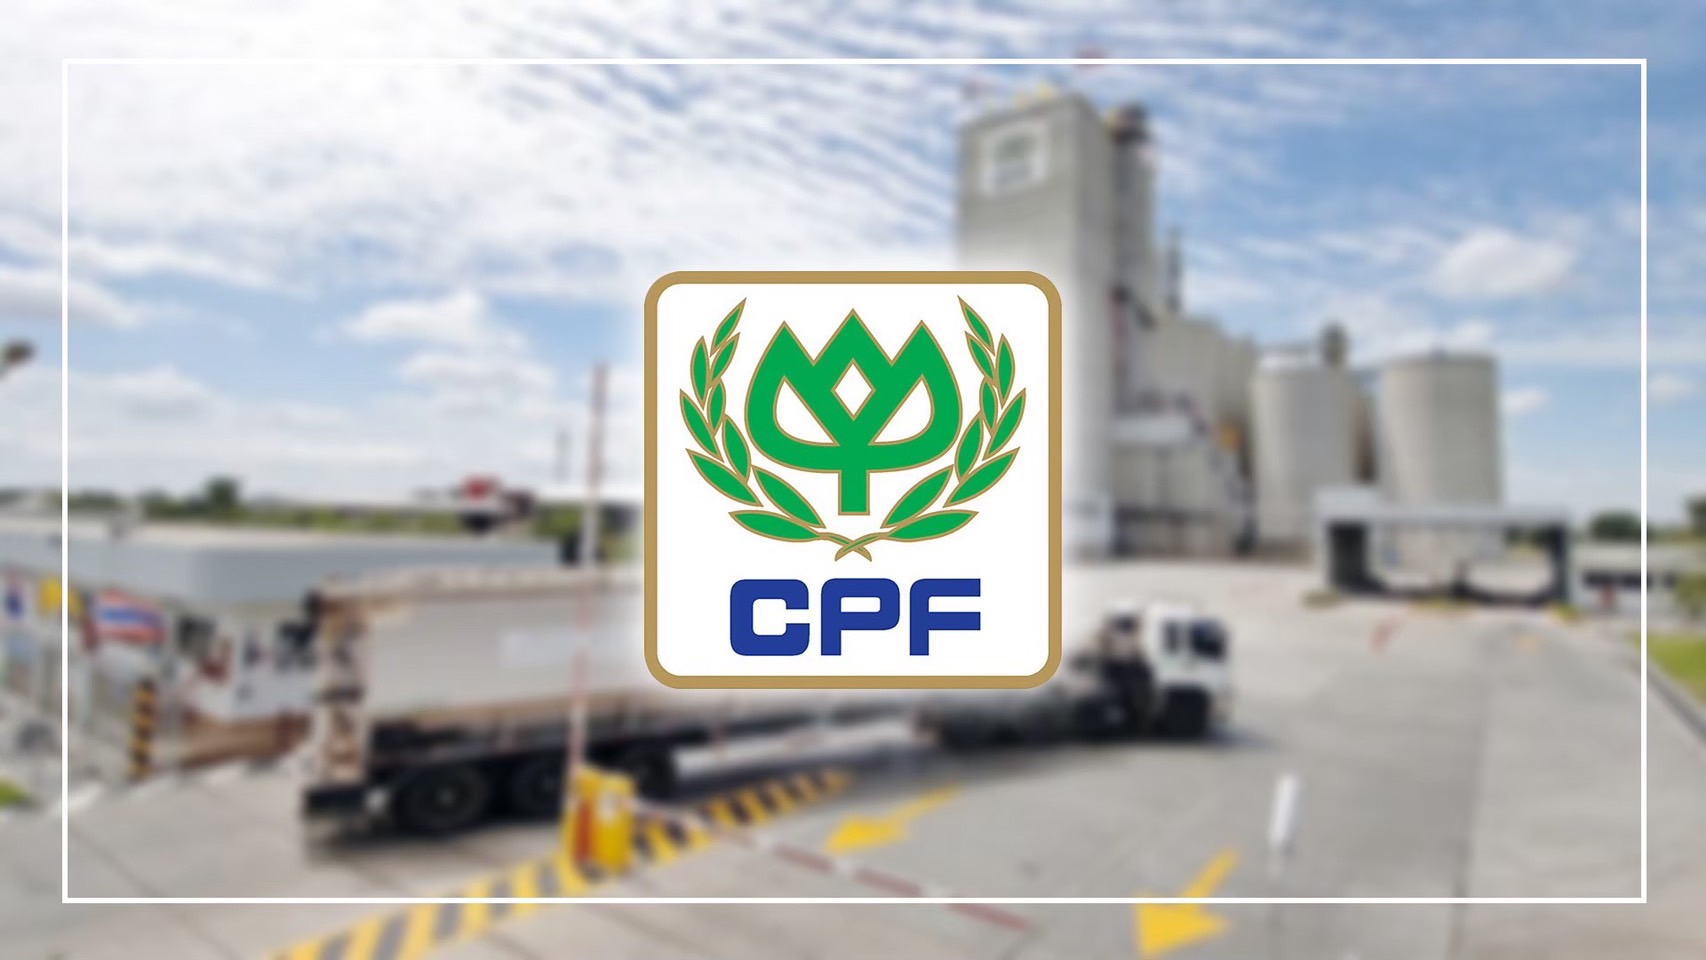 CP Foods Joins Forces with CP Foton in Pioneering Electric Truck Pilot for Sustainable Agriculture and Carbon Reduction